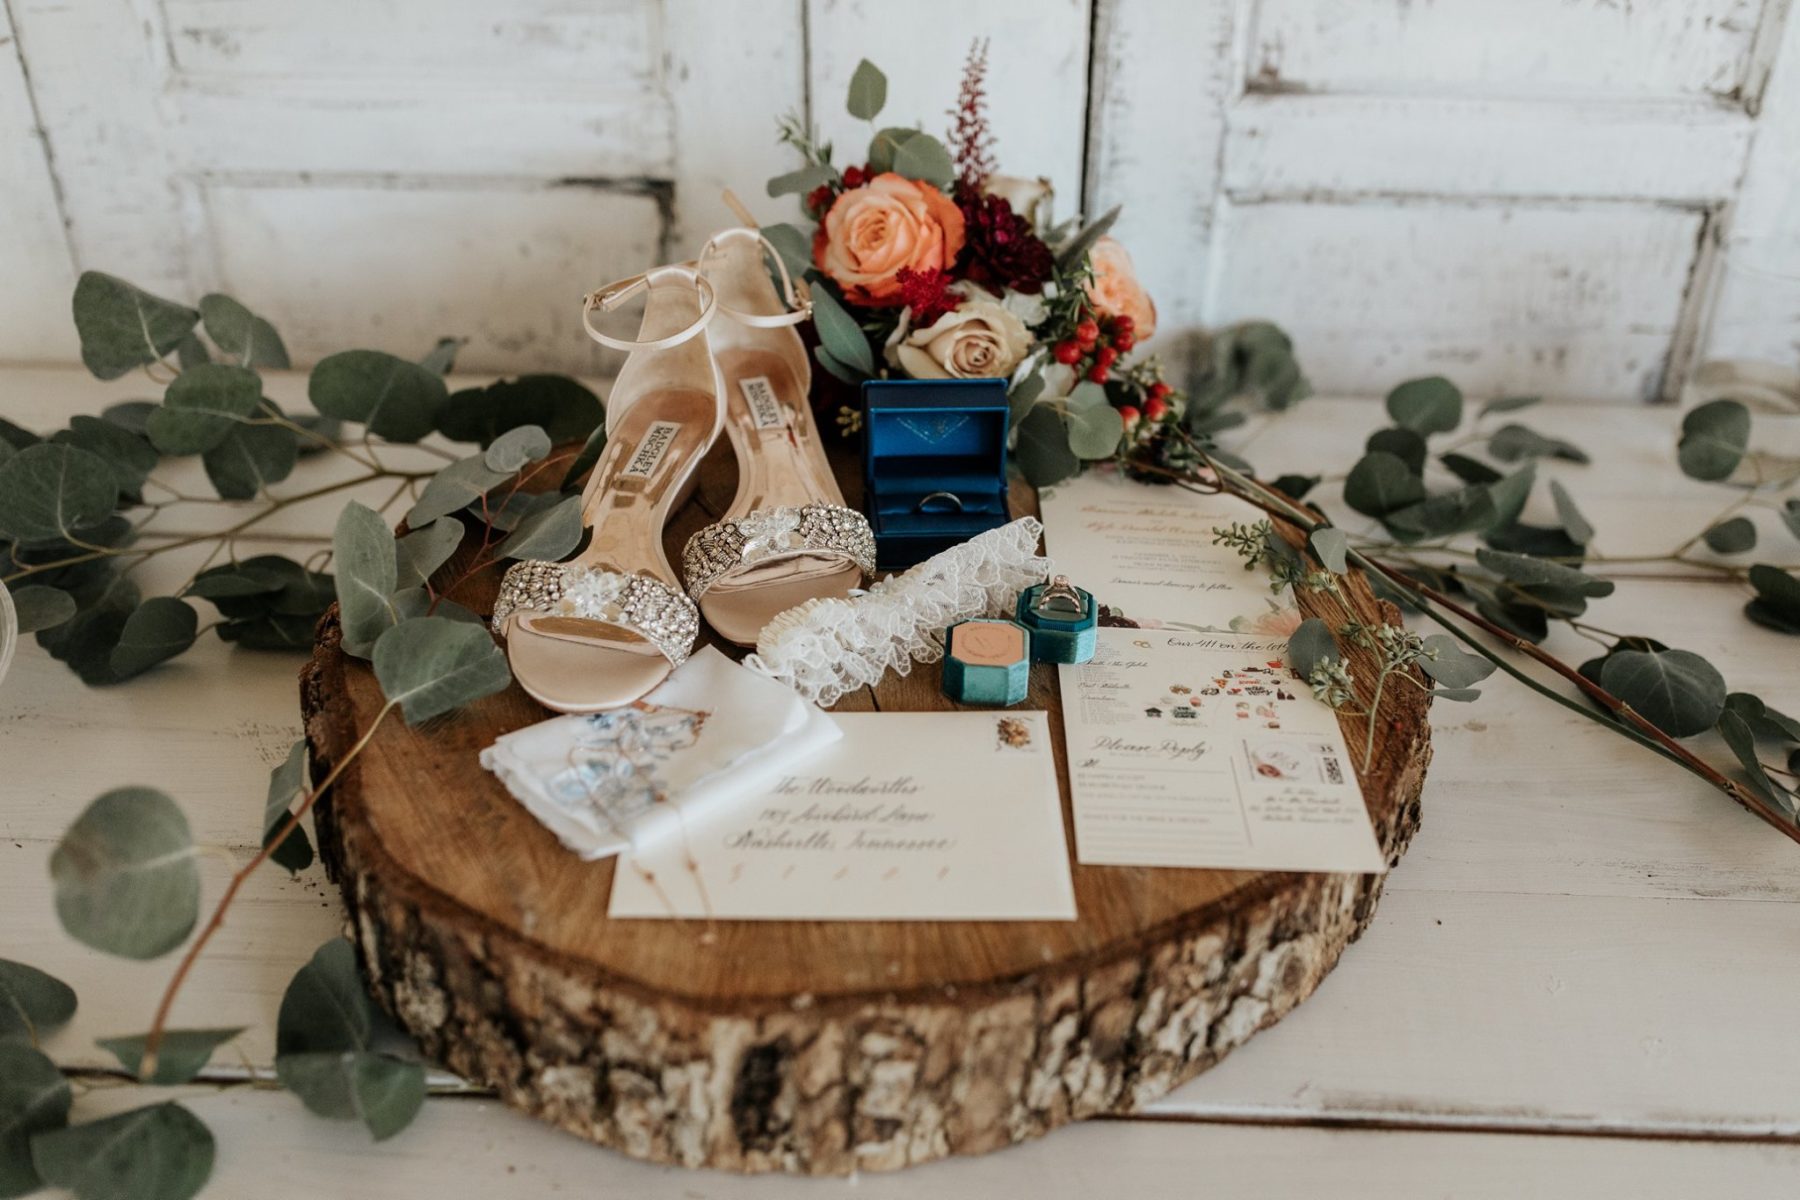 Simply Rustic Front Porch Farms wedding featured on Nashville Bride Guide